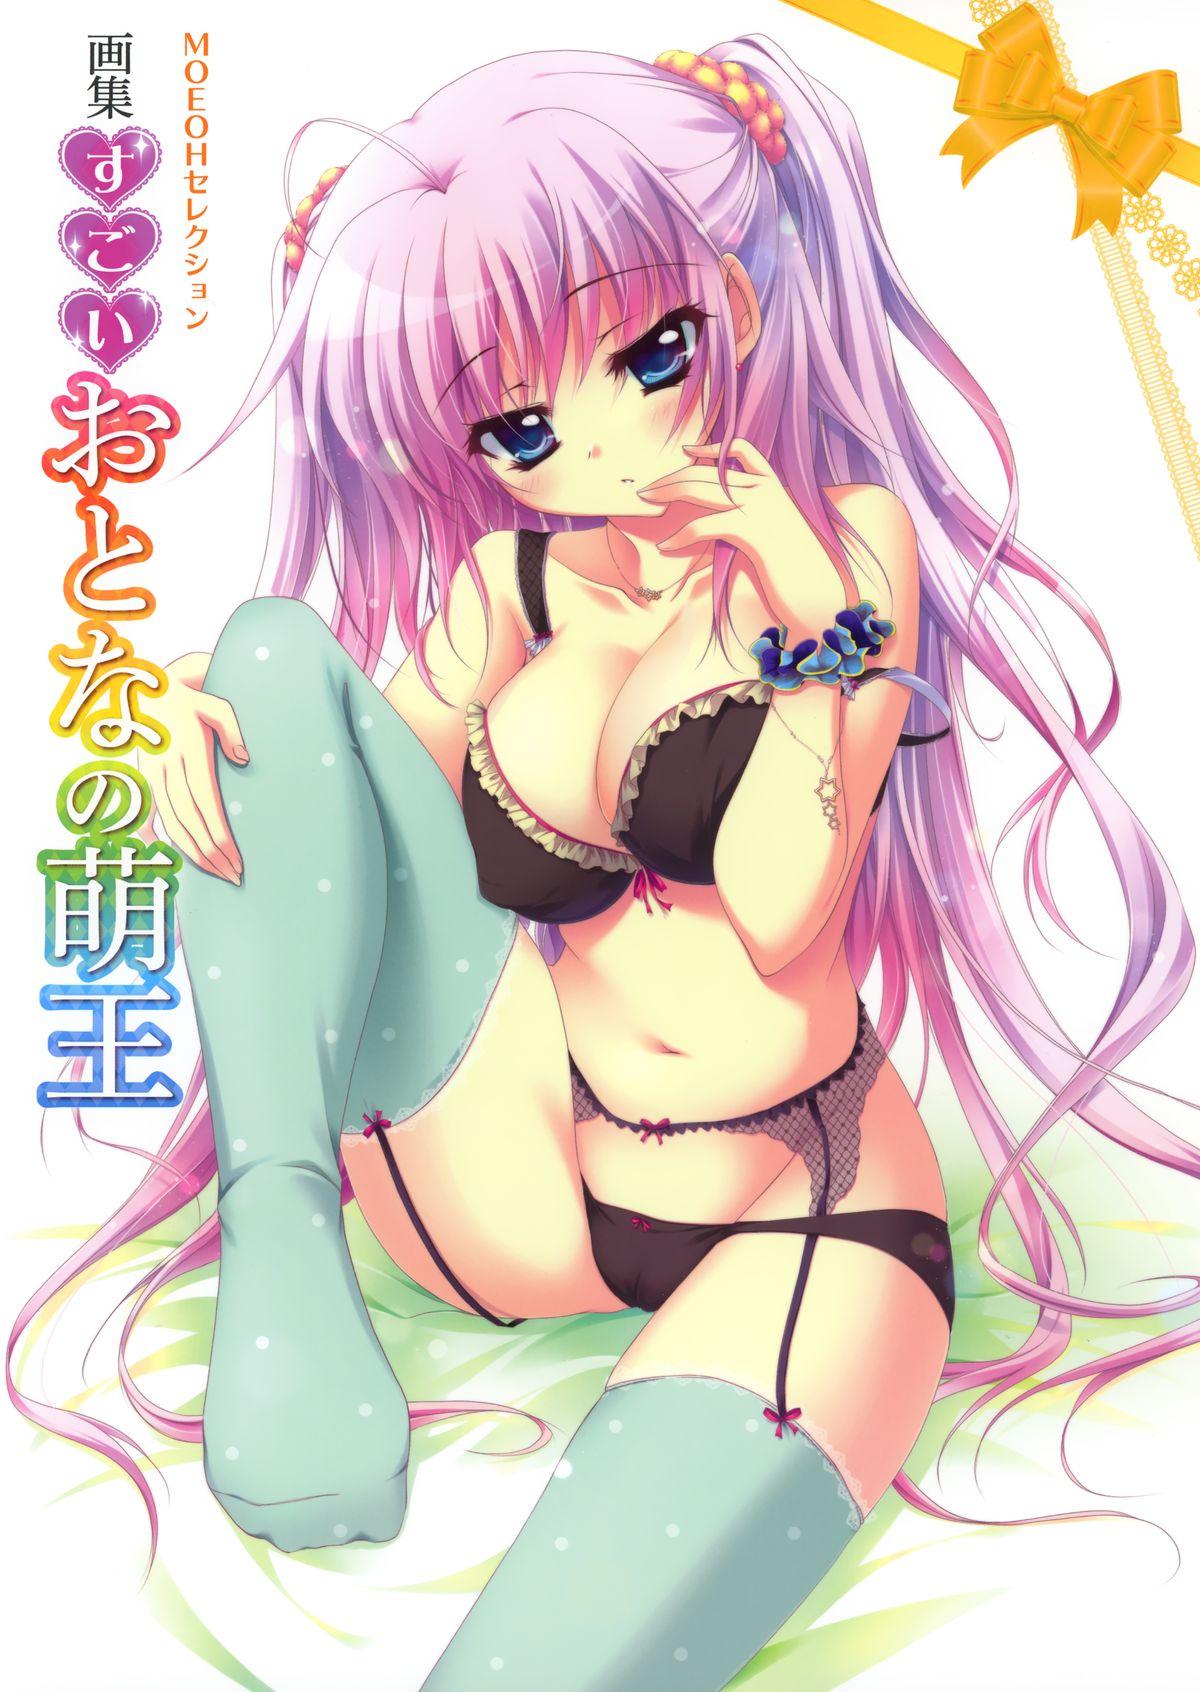 Asians MOEOH Selection - Artbook Sugoi Otona no Moeoh College - Picture 1